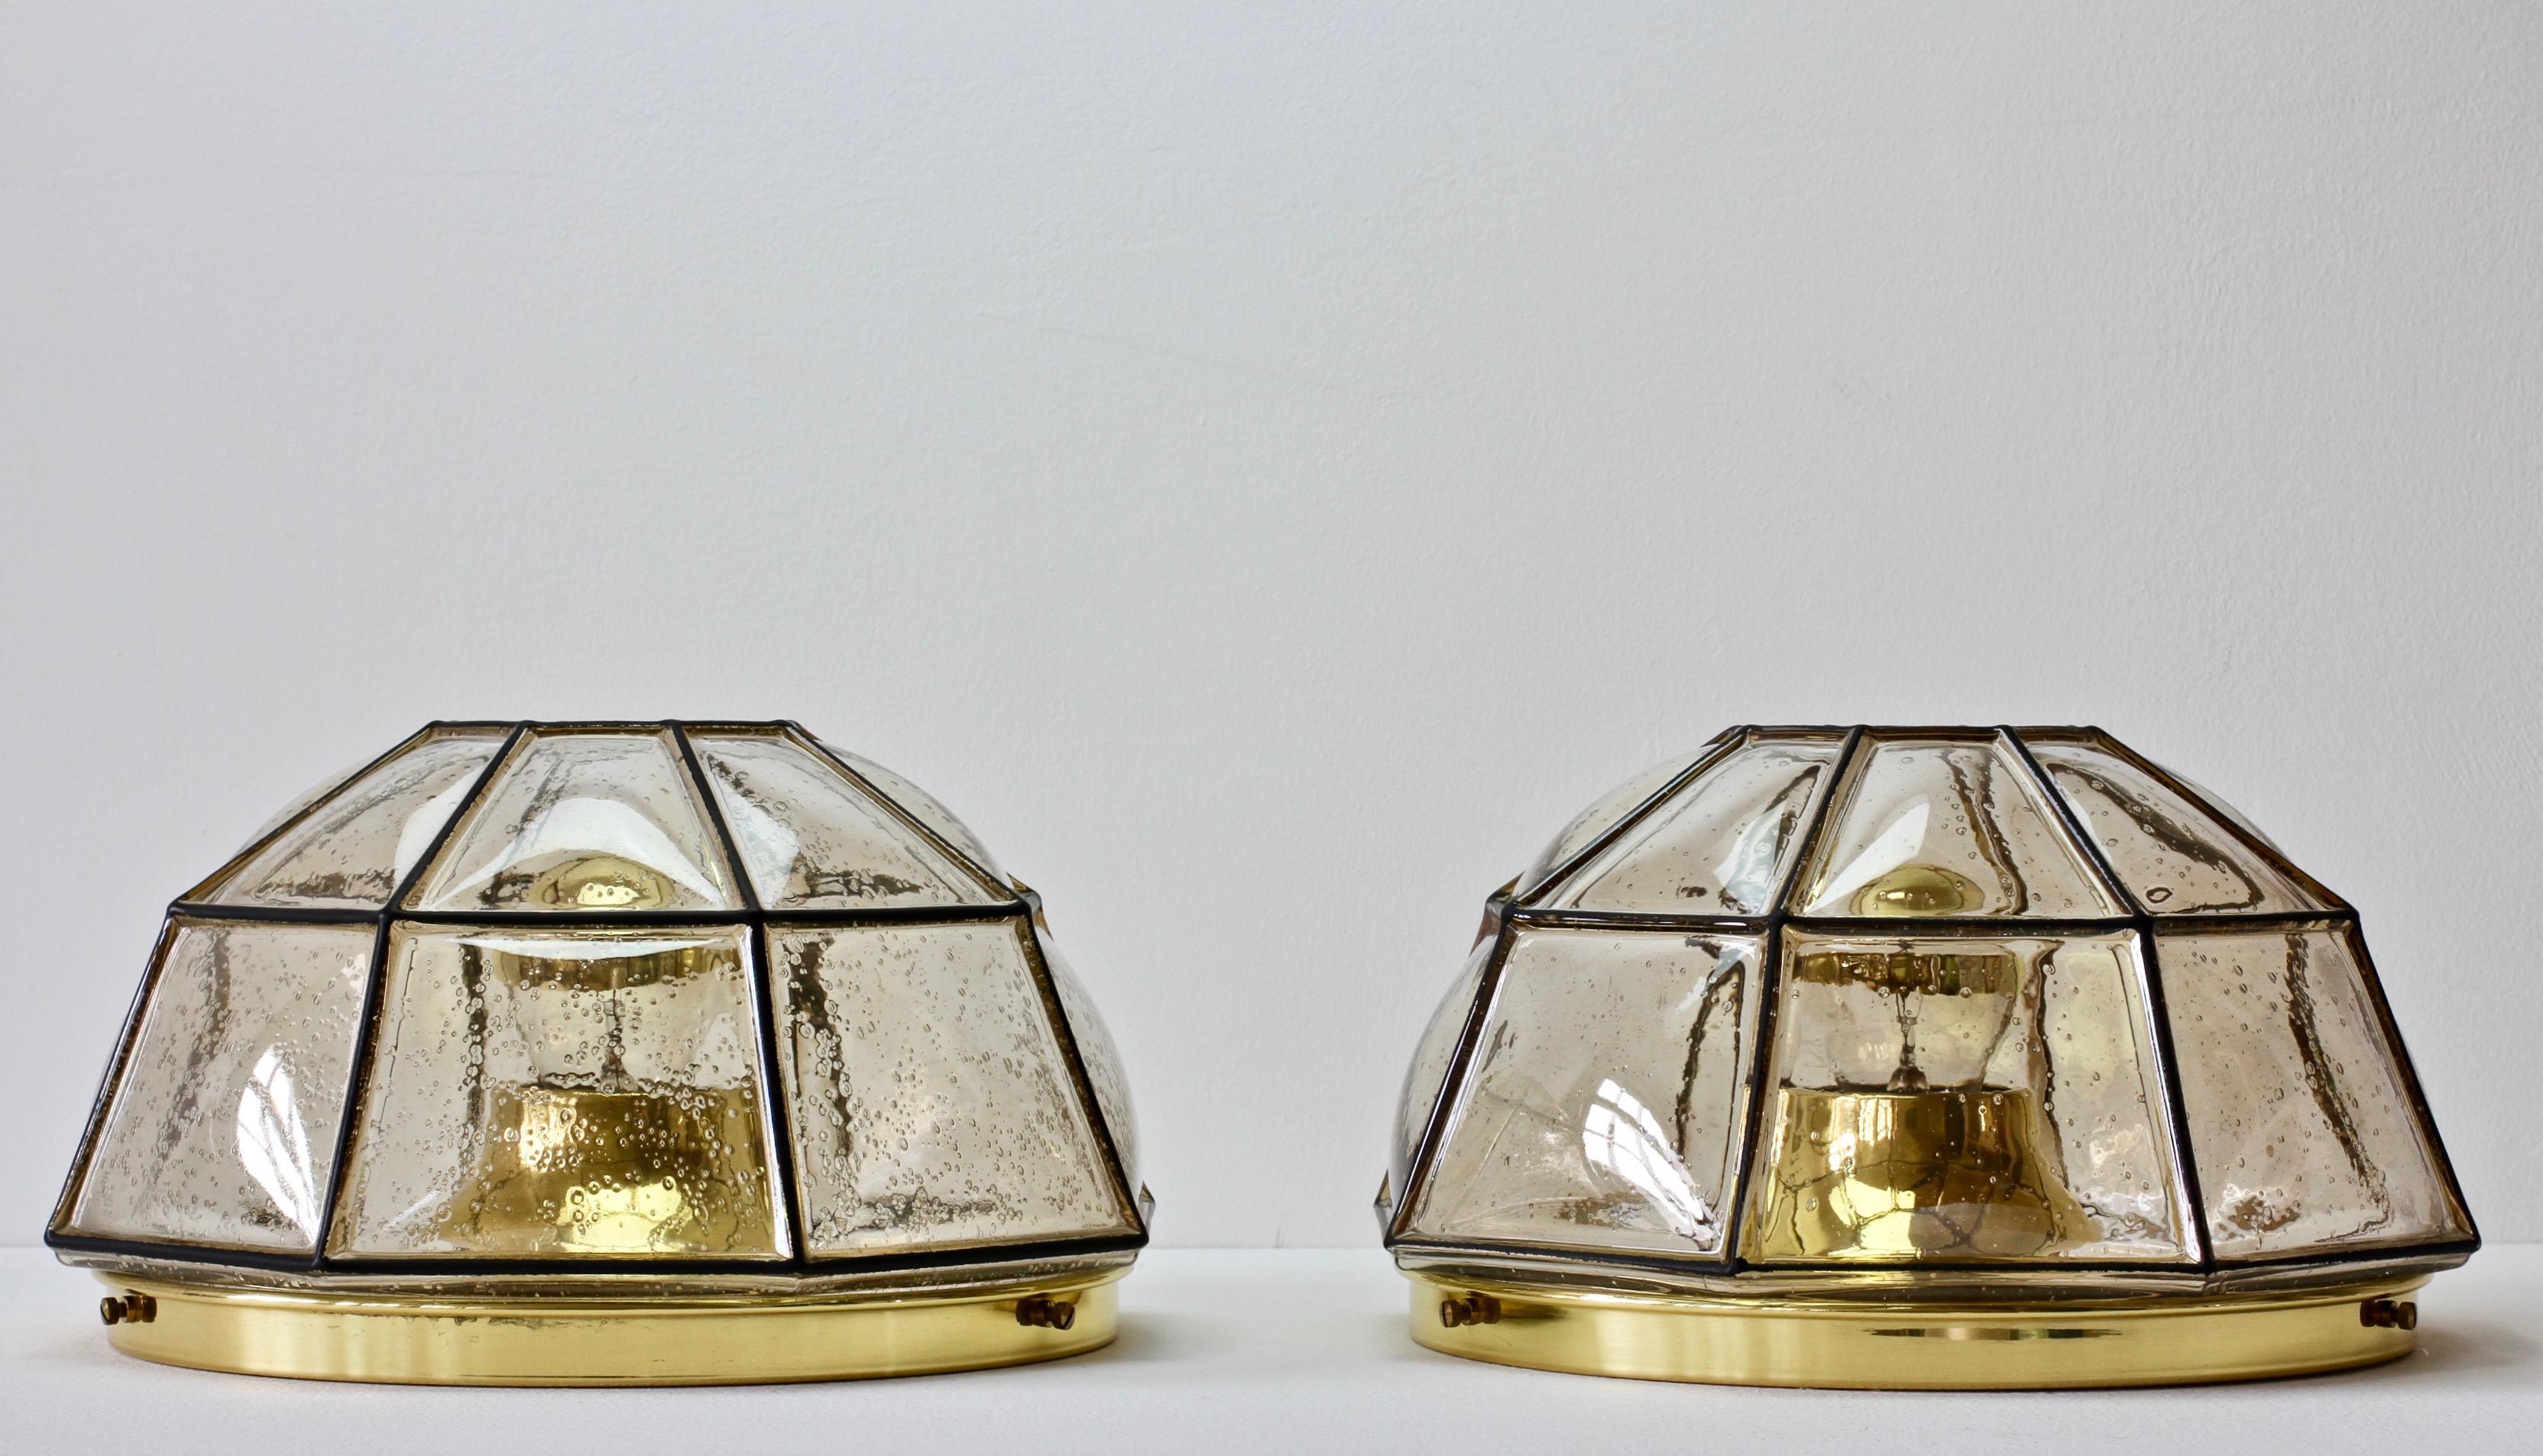 Glashütte Limburg vintage midcentury pair of minimal, geometric and elegant mouth blown clear glass - with a slight champagne / topaz tone - and polished brass wall or ceiling flush mount lamps or light fixtures / sconces made in Germany, circa